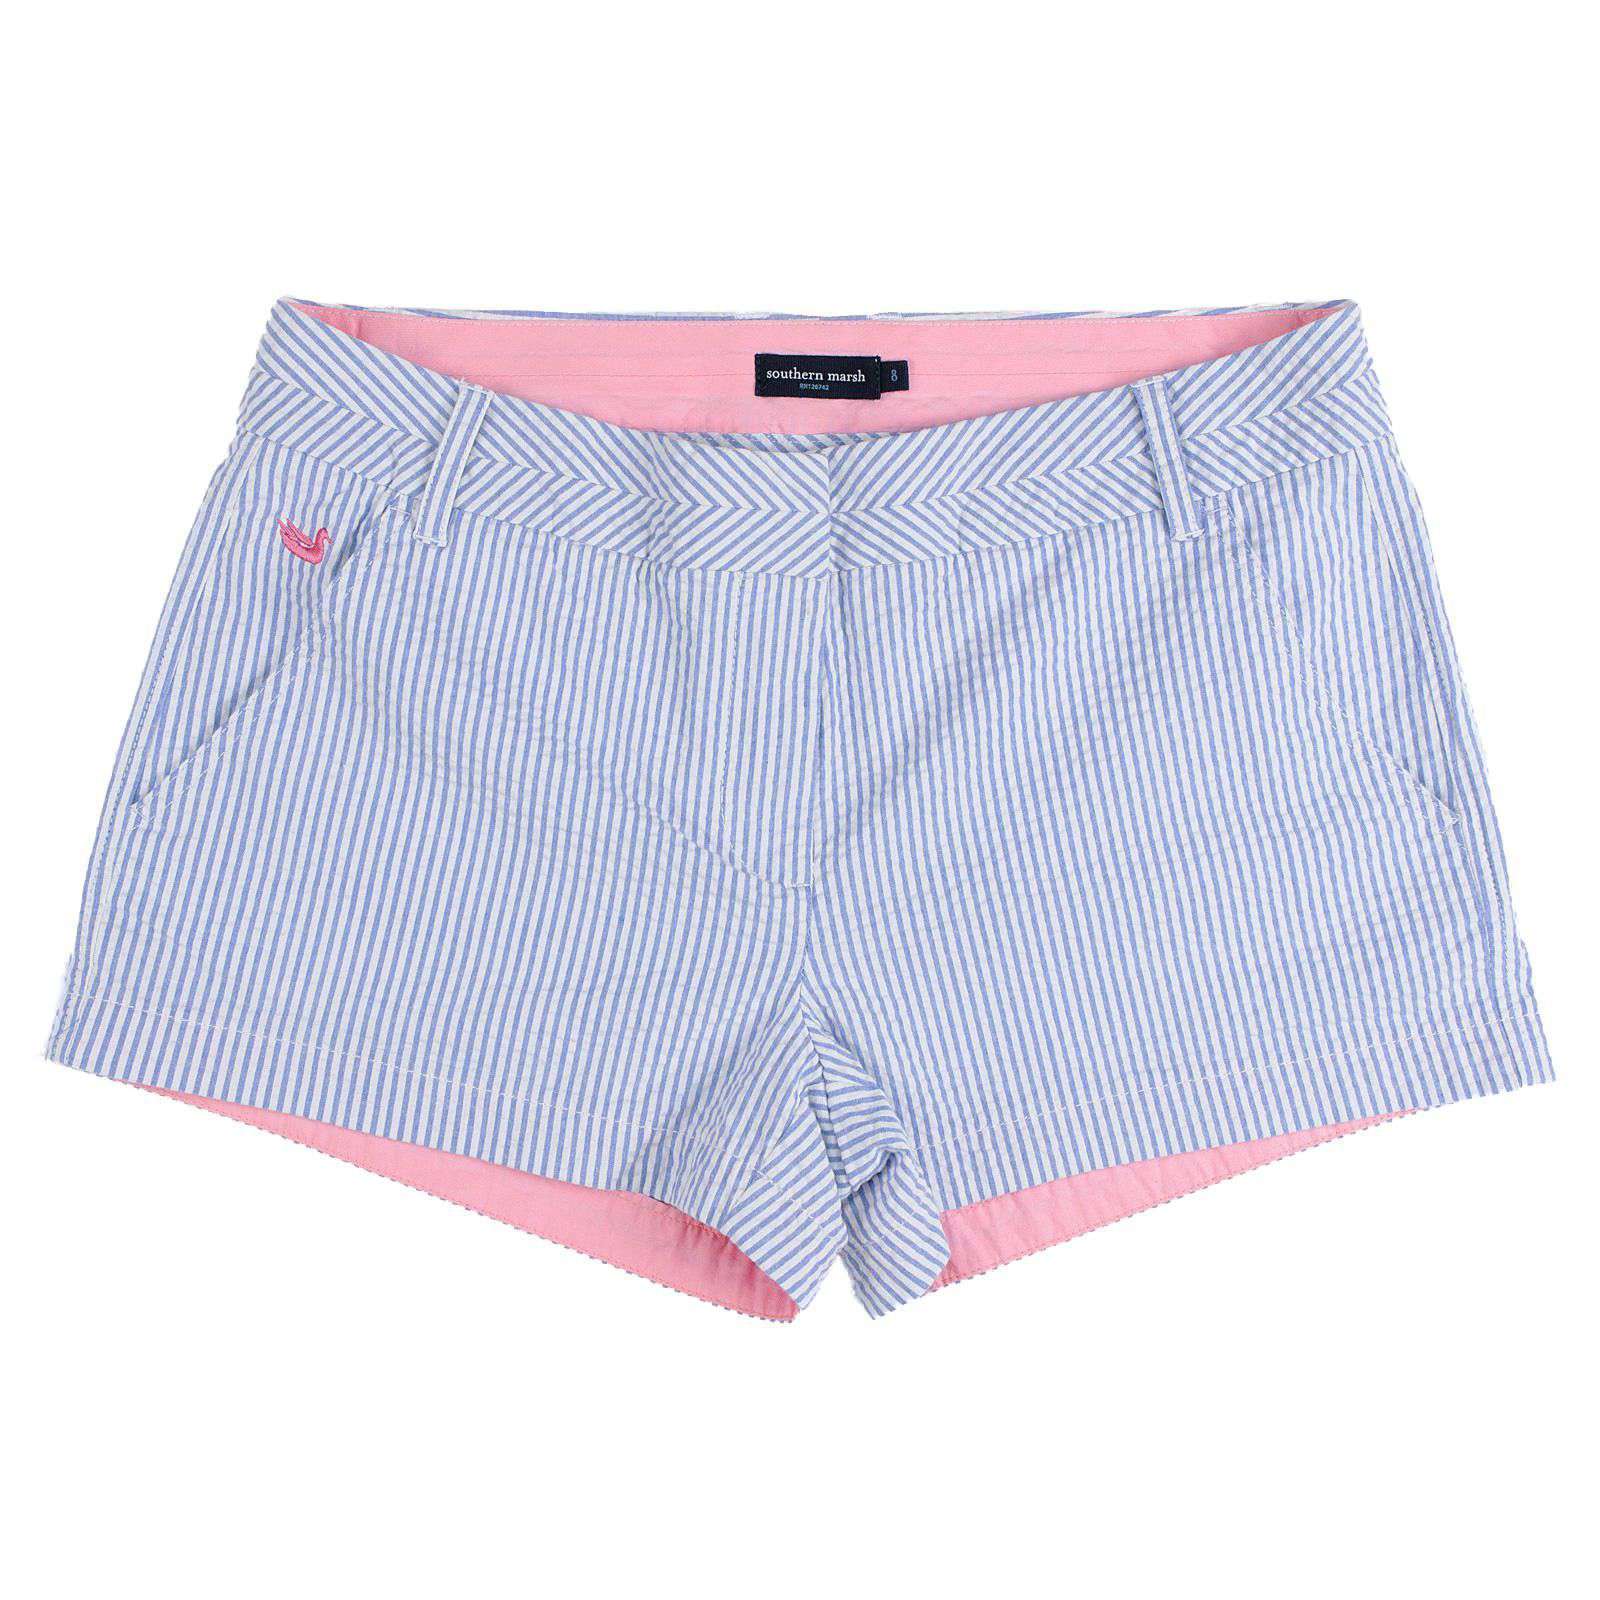 The Brighton Seersucker Chino Short in Blue Stripe by Southern Marsh - Country Club Prep